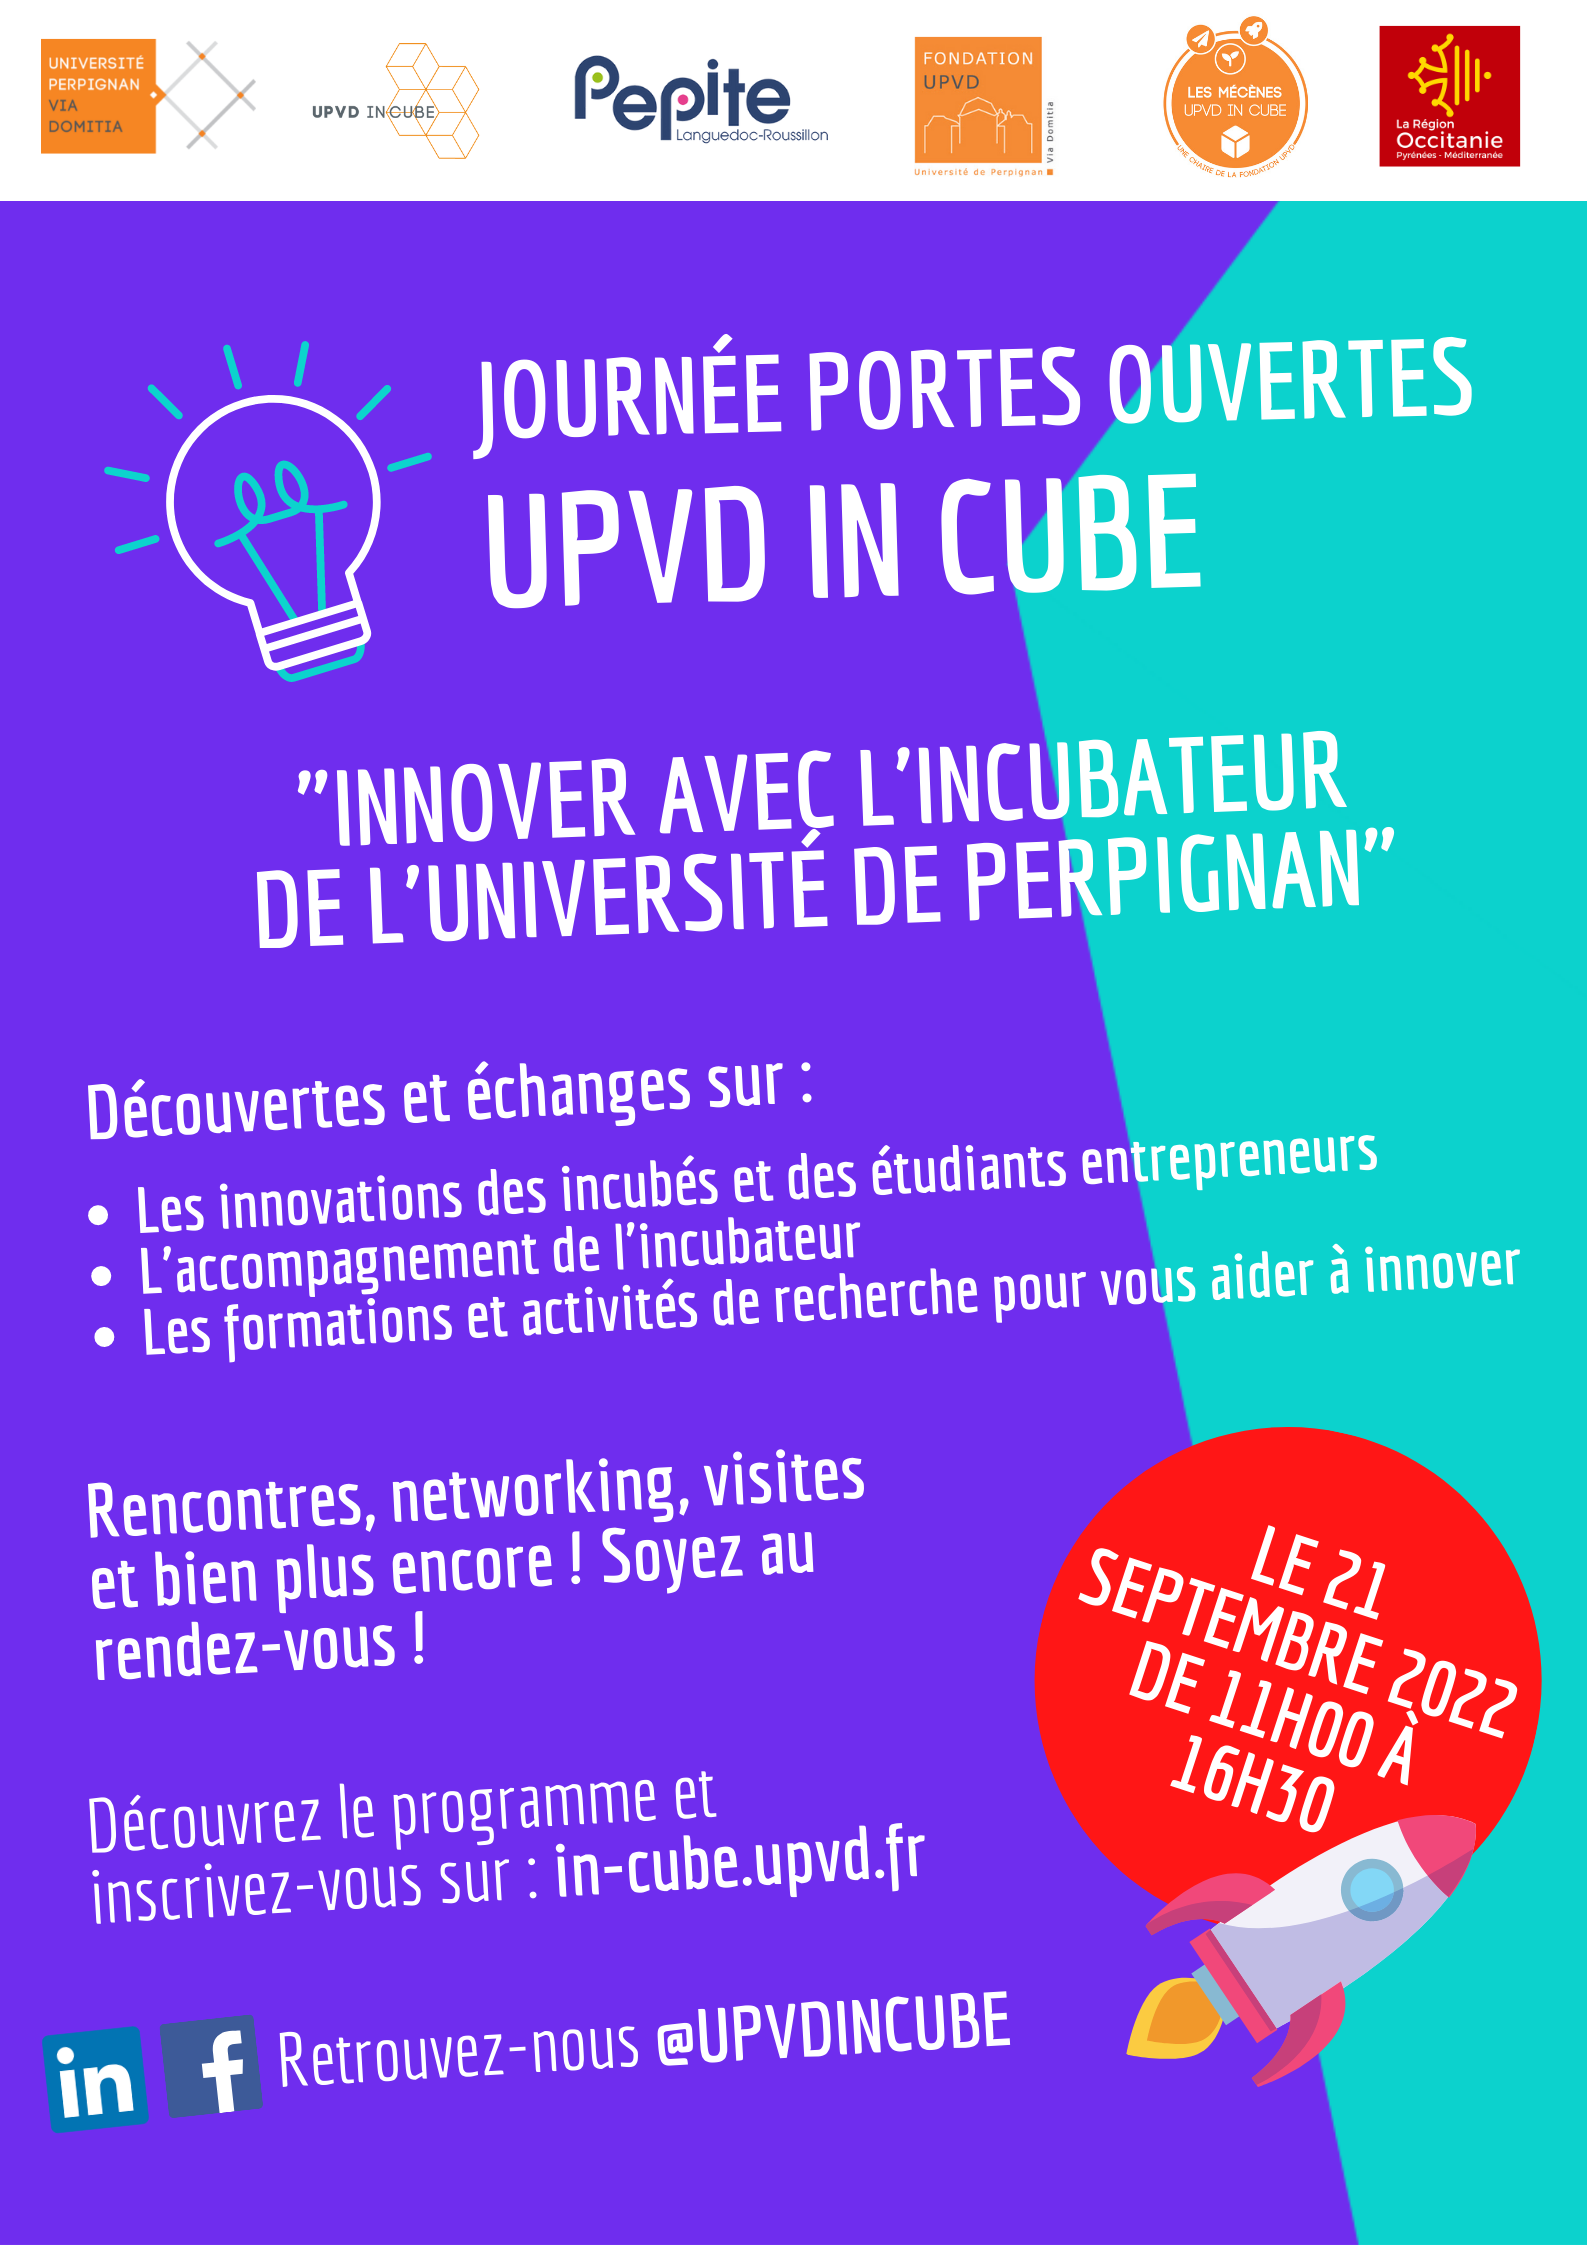 JOURNEE PORTES OUVERTES - UPVD IN CUBE